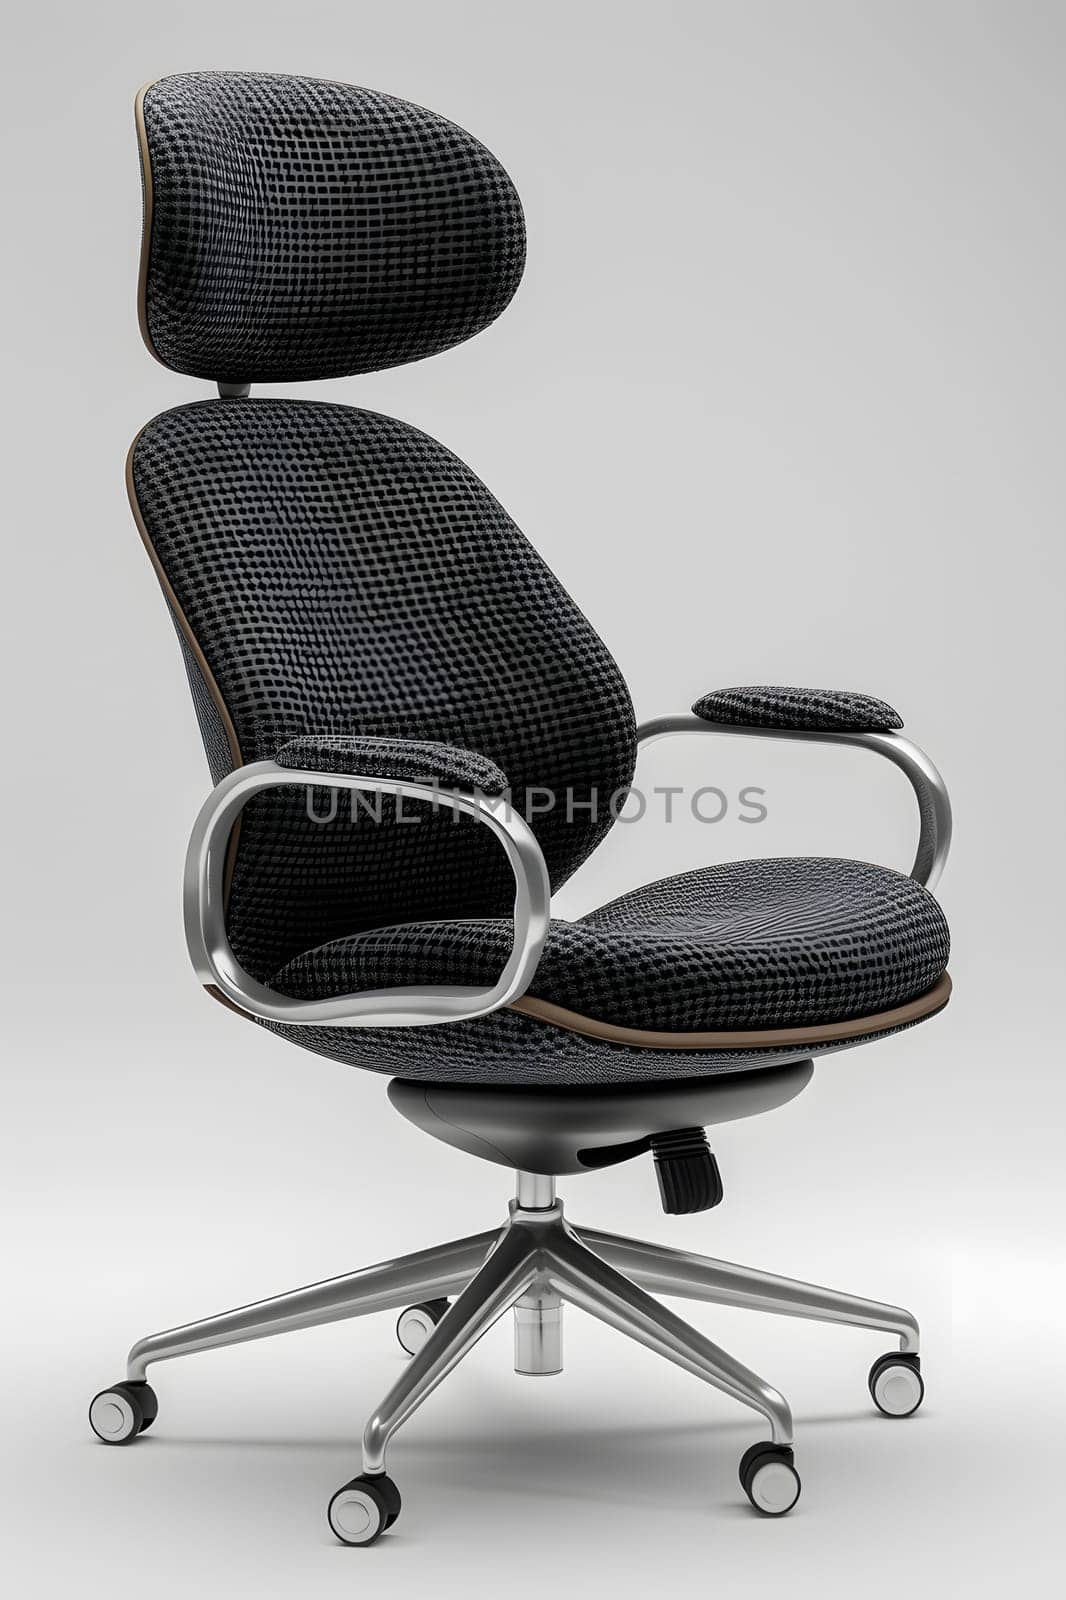 Black office chair with wheels, headrest, and armrest on a white background by Nadtochiy